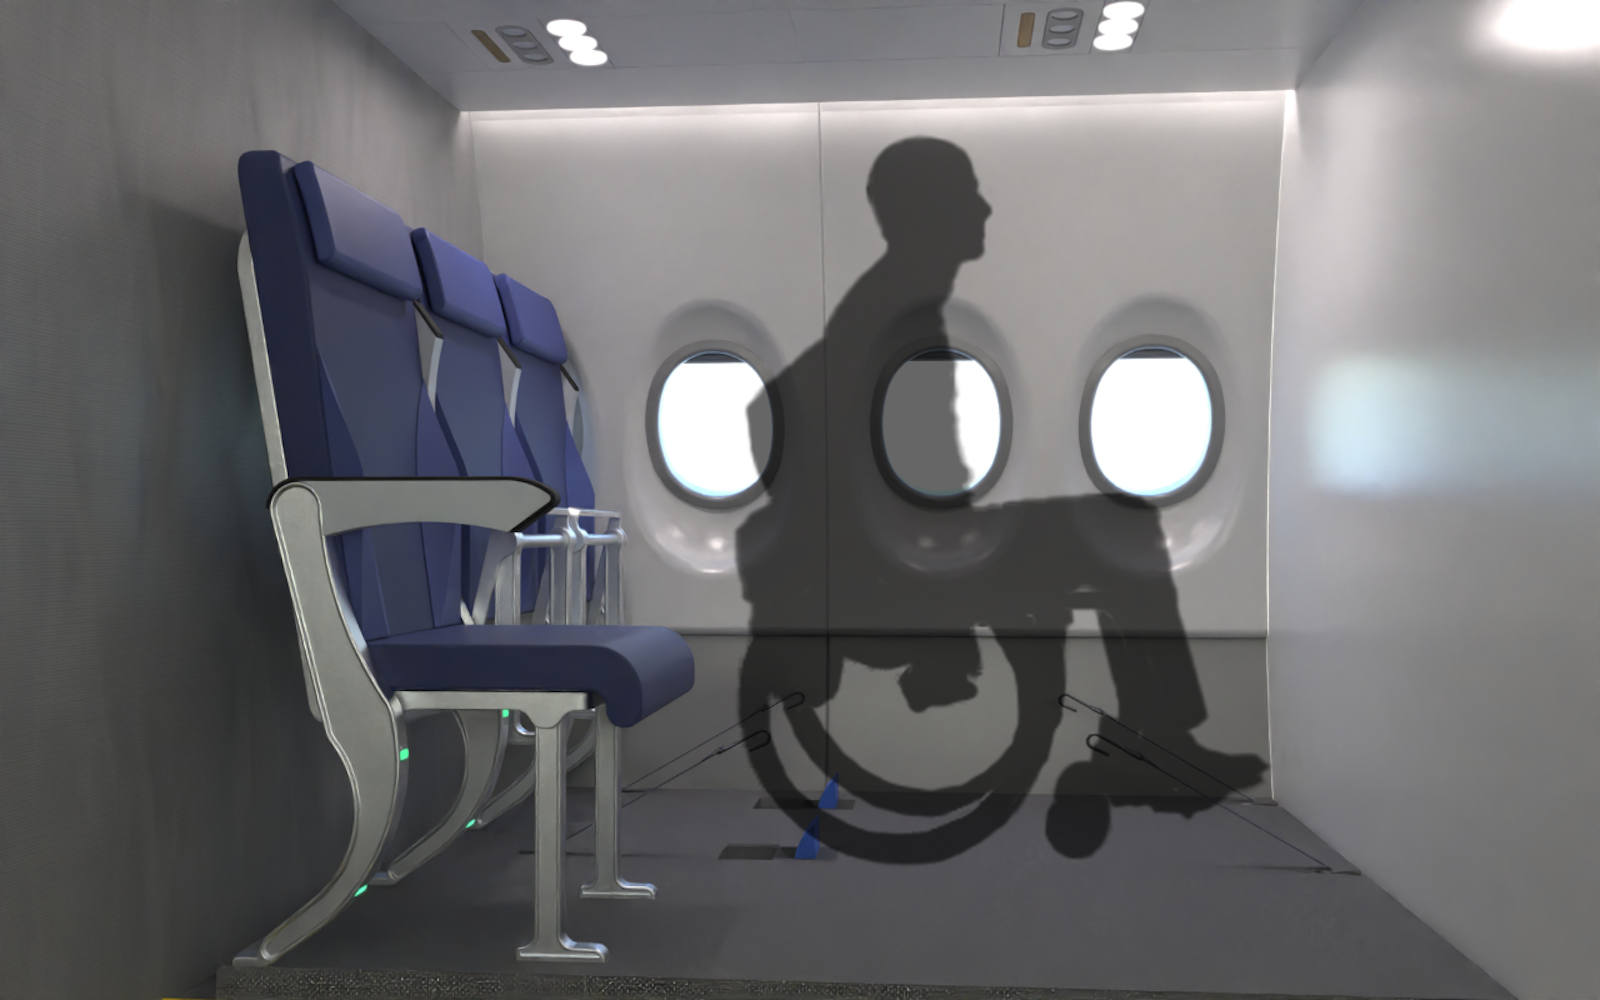 new airplane cabin concept - wheelchair users